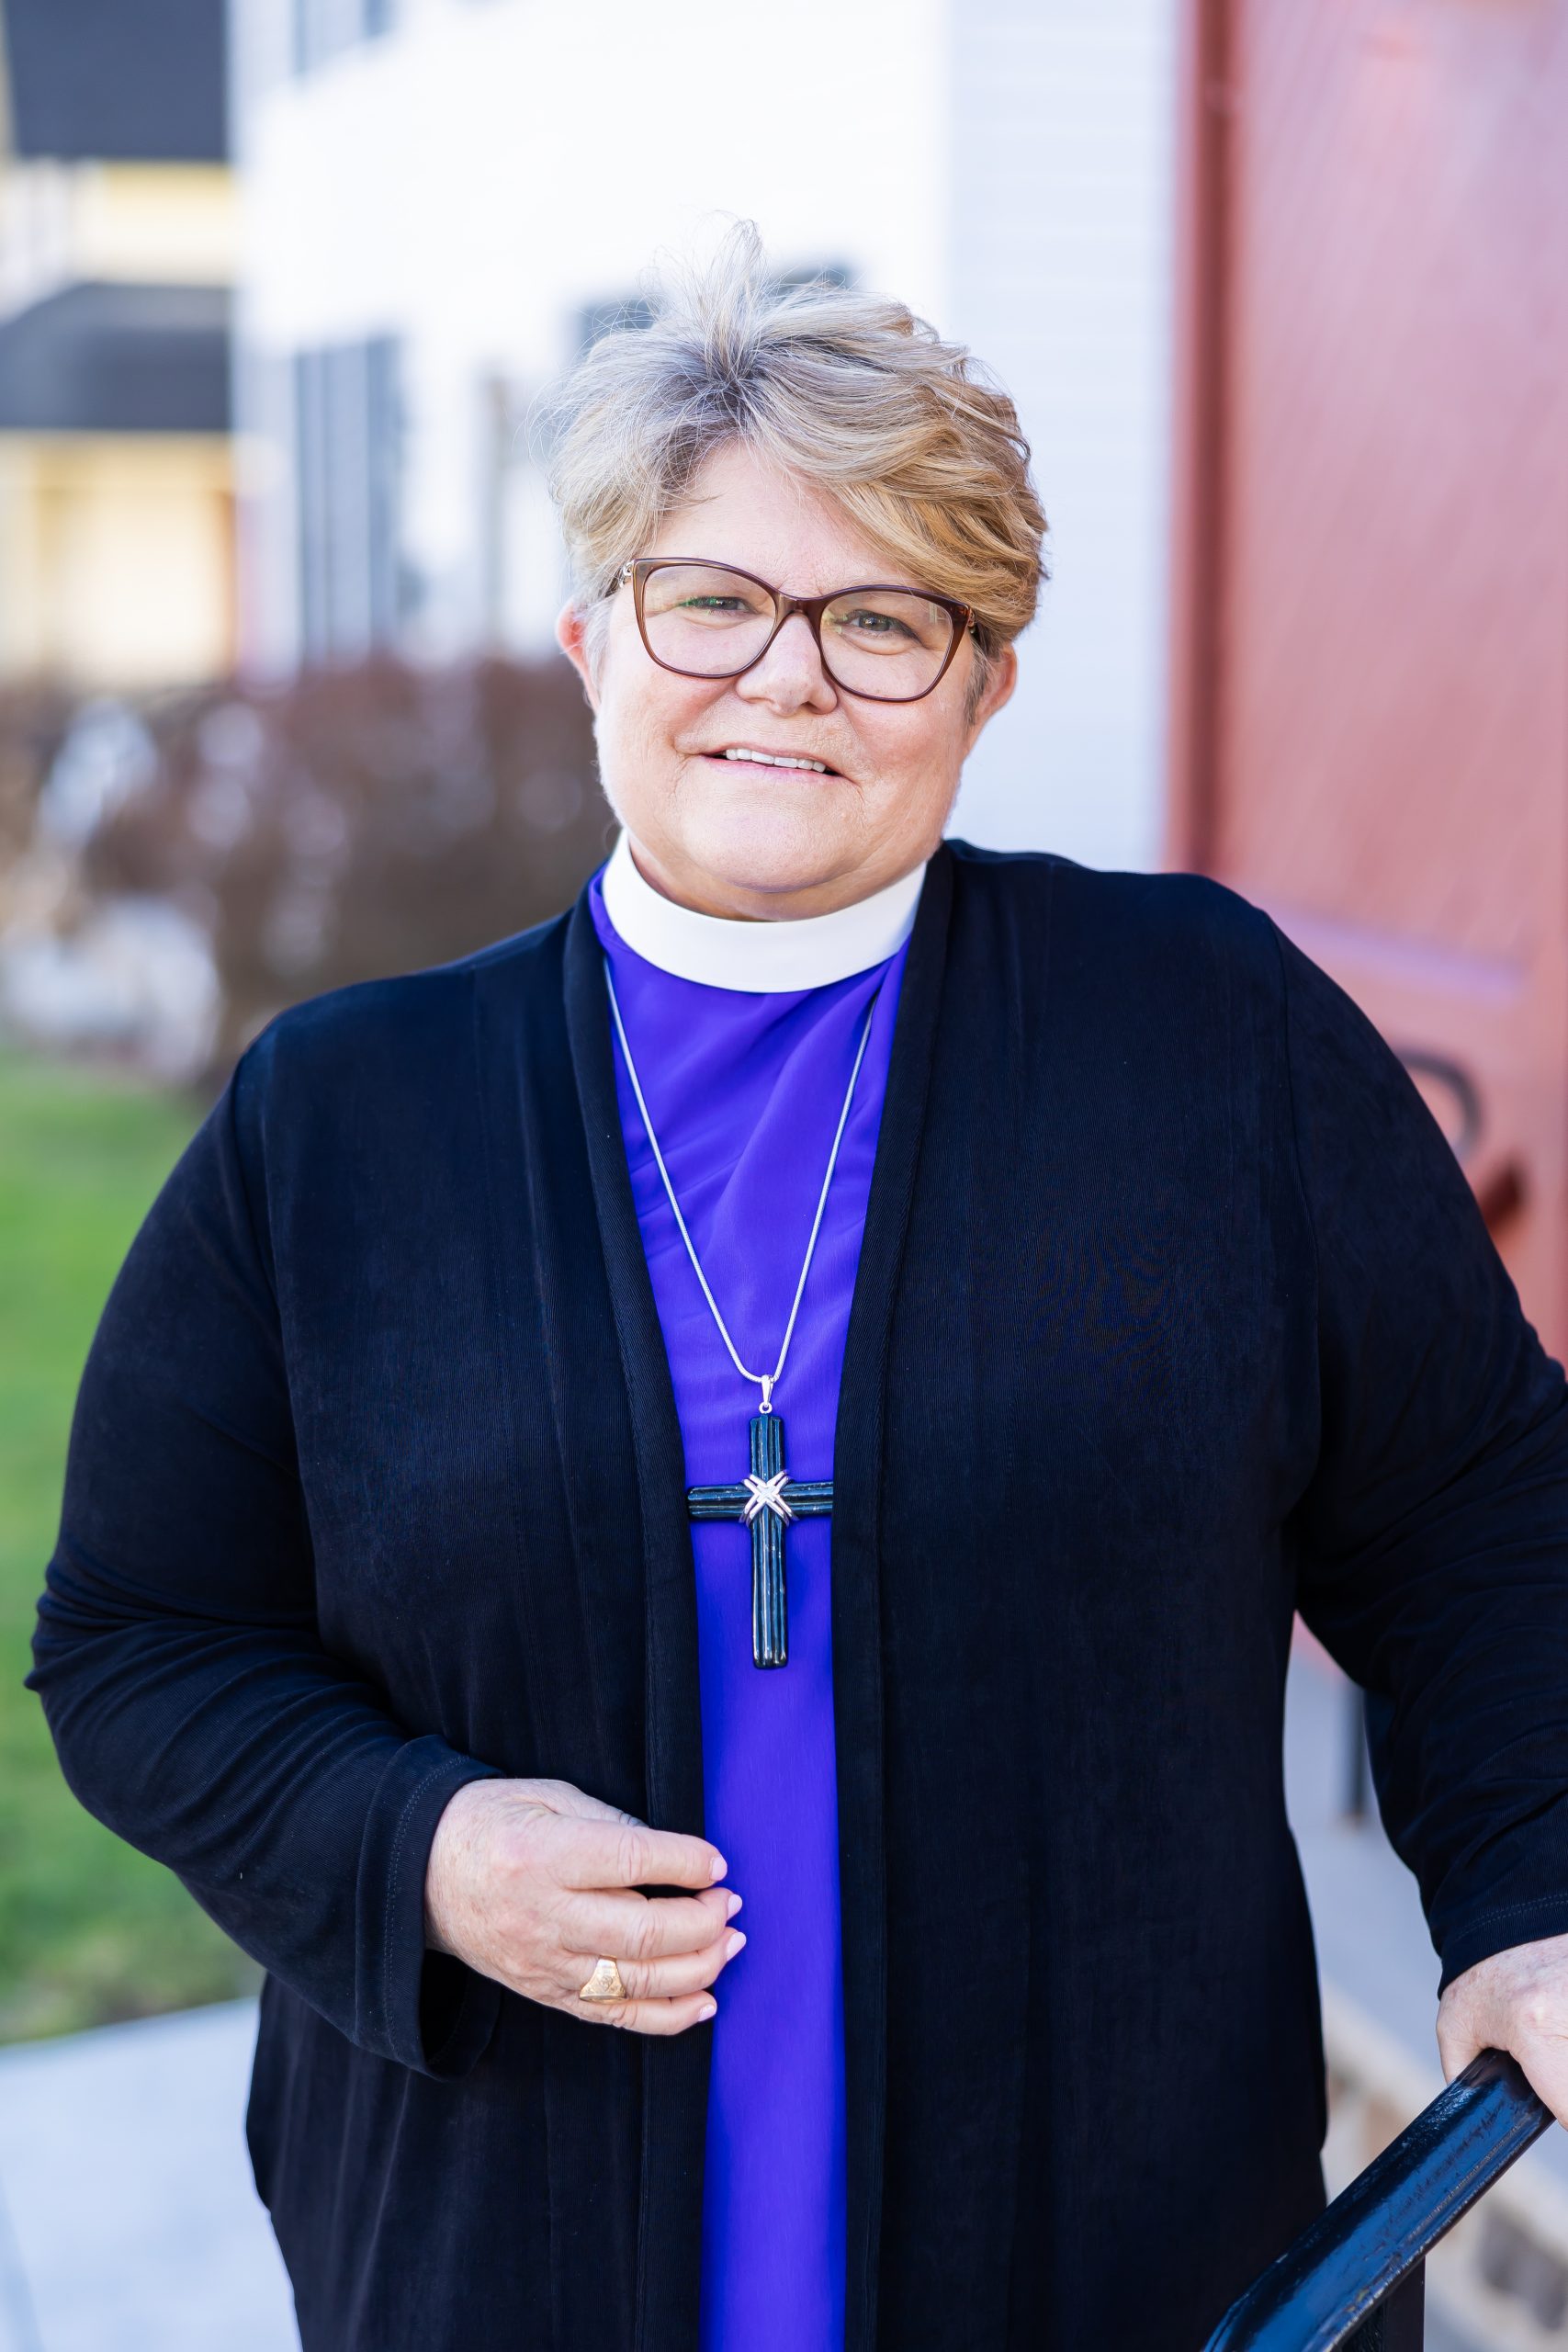 Bishop DeDe smiles broadly and kindly toward the camera. She's wearing her clericals, including her collar and a pectoral cross. She's outdoors on the steps of a church. You can see a hint of the recognizably Episcopal-Red door over her left shoulder.